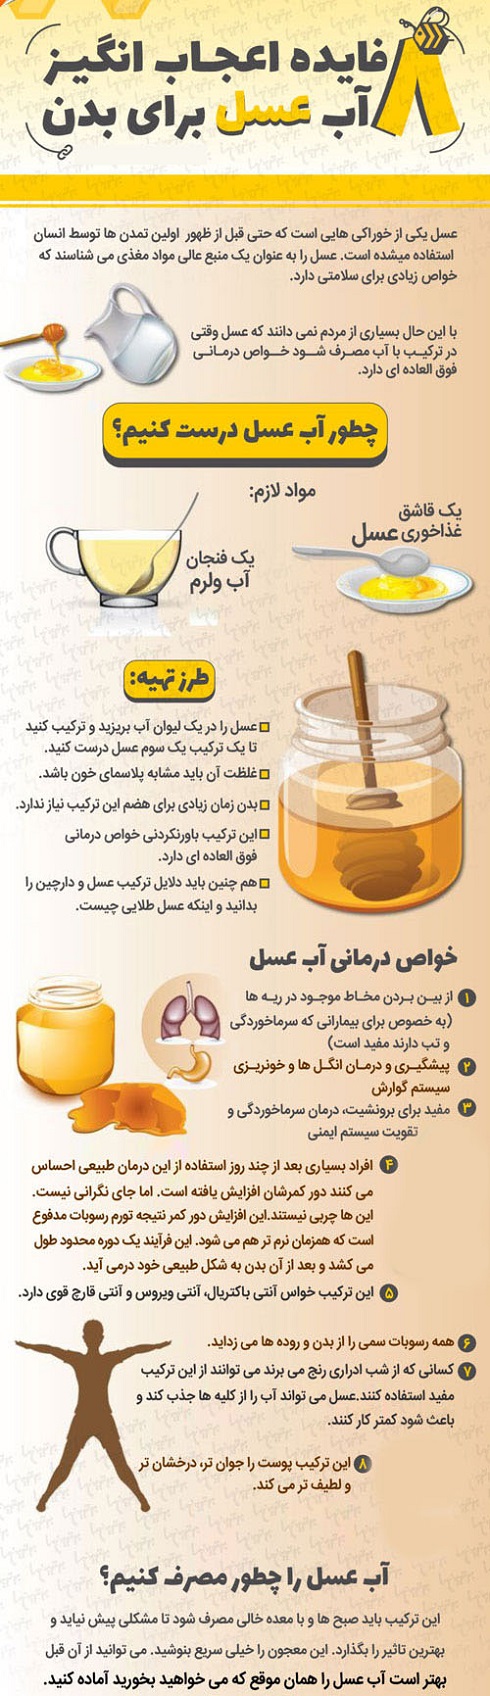 8_miracle_honey_water_for_the_body_infographic